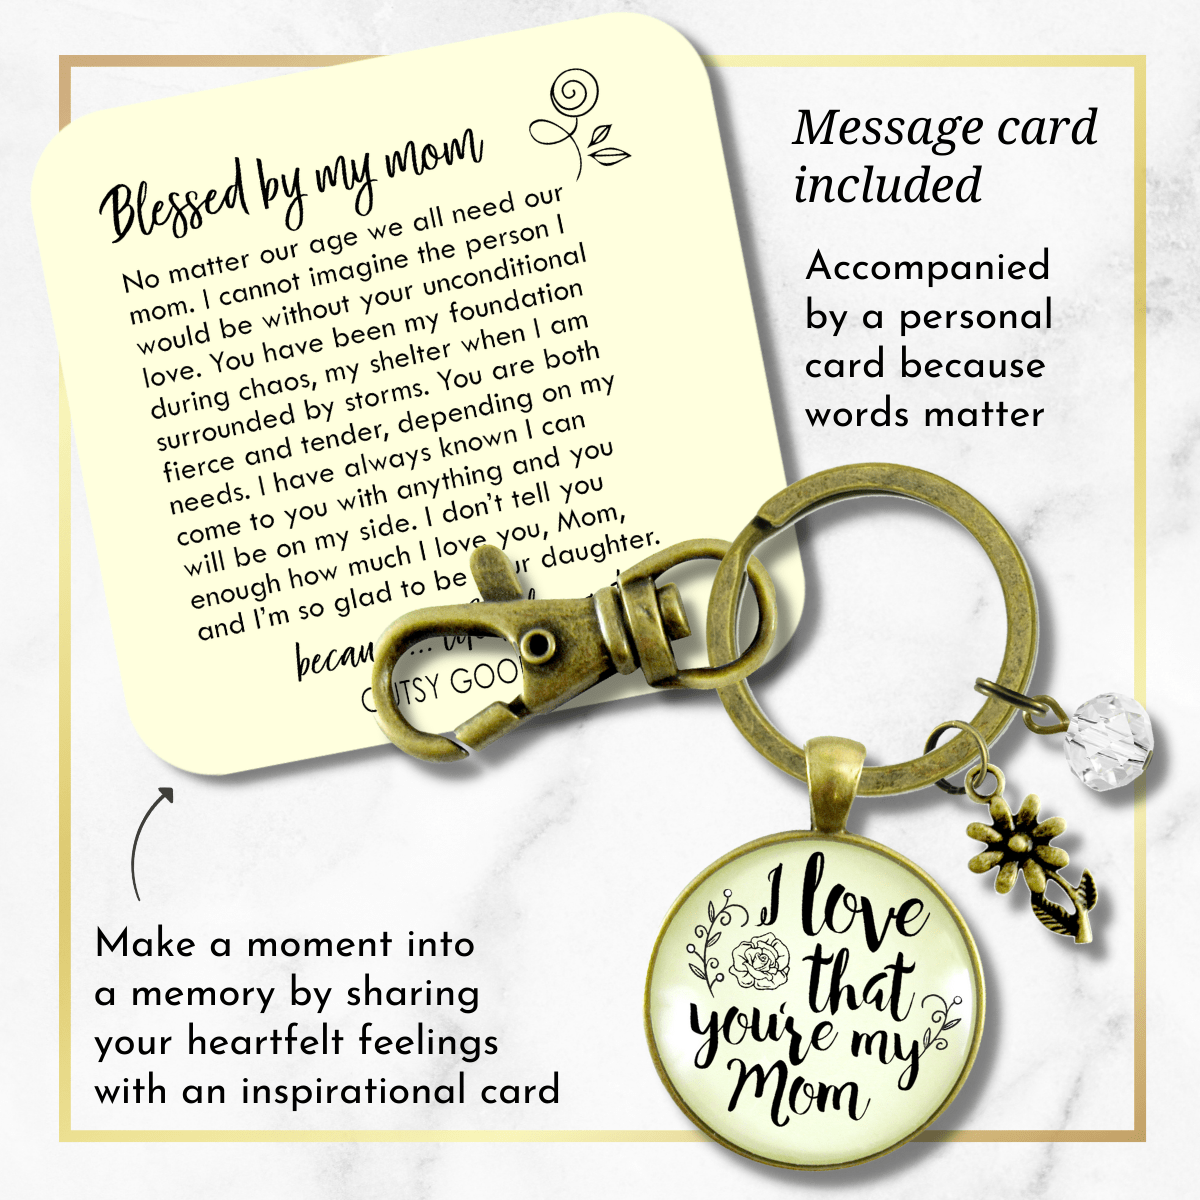 My Mom Keychain I Love You Meaningful Quote Gift from Daughter - Gutsy Goodness Handmade Jewelry;My Mom Keychain I Love You Meaningful Quote Gift From Daughter - Gutsy Goodness Handmade Jewelry Gifts